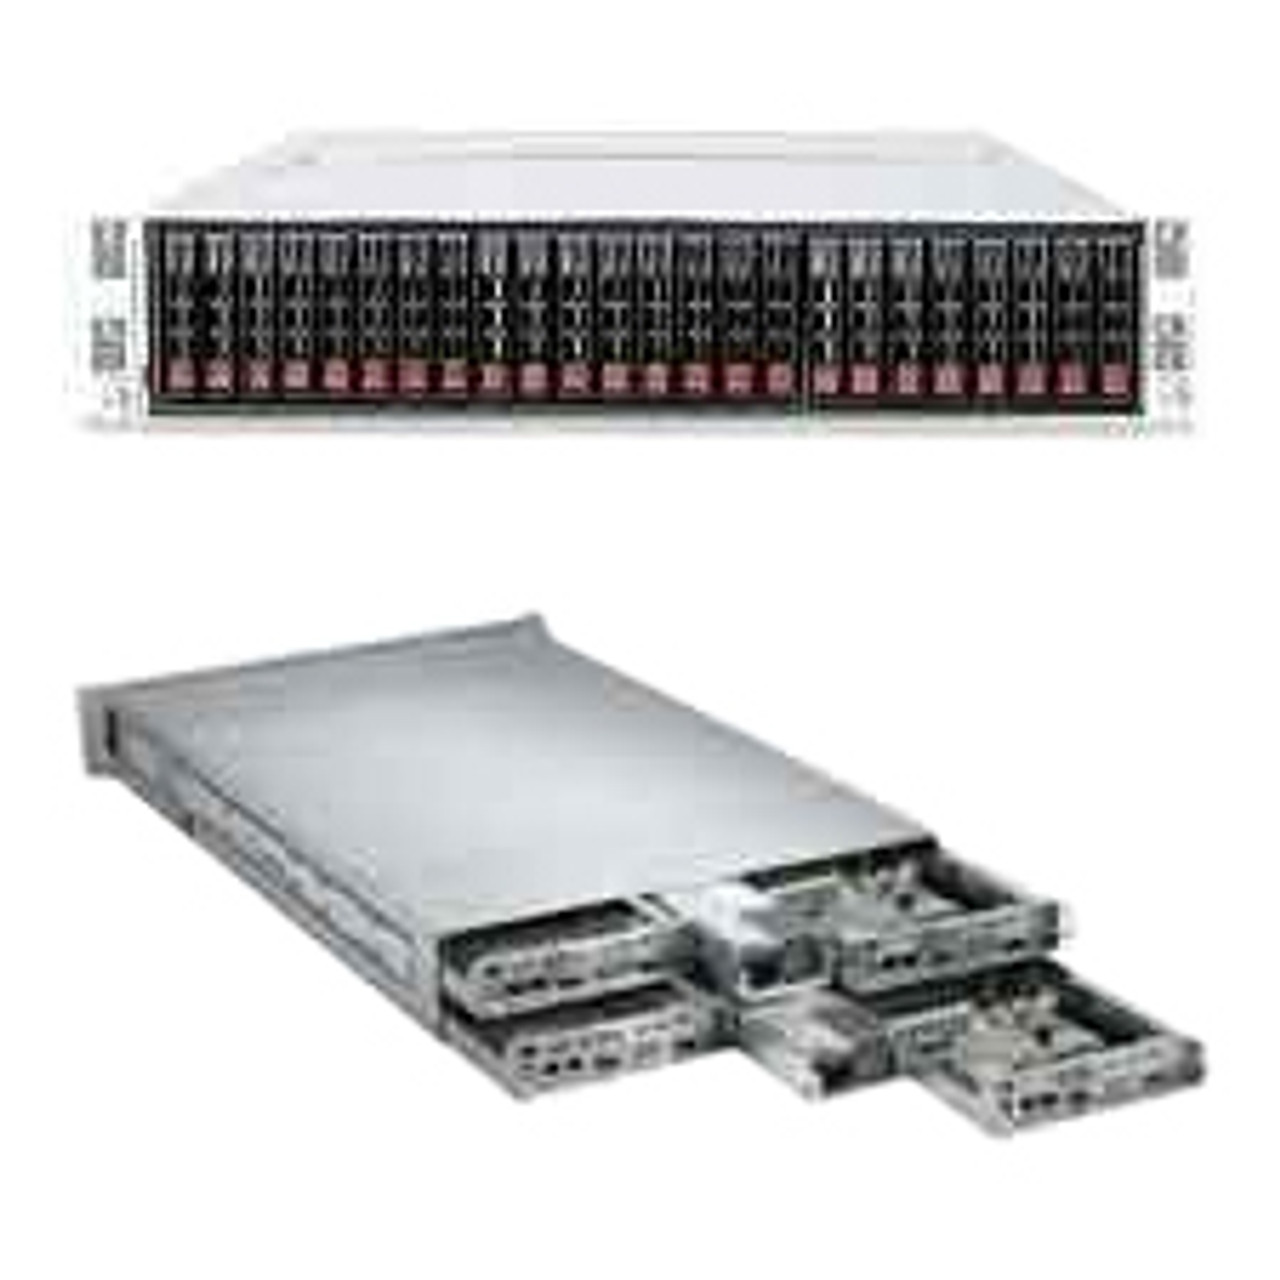 Supermicro AS-2122TG-H6IBQRF